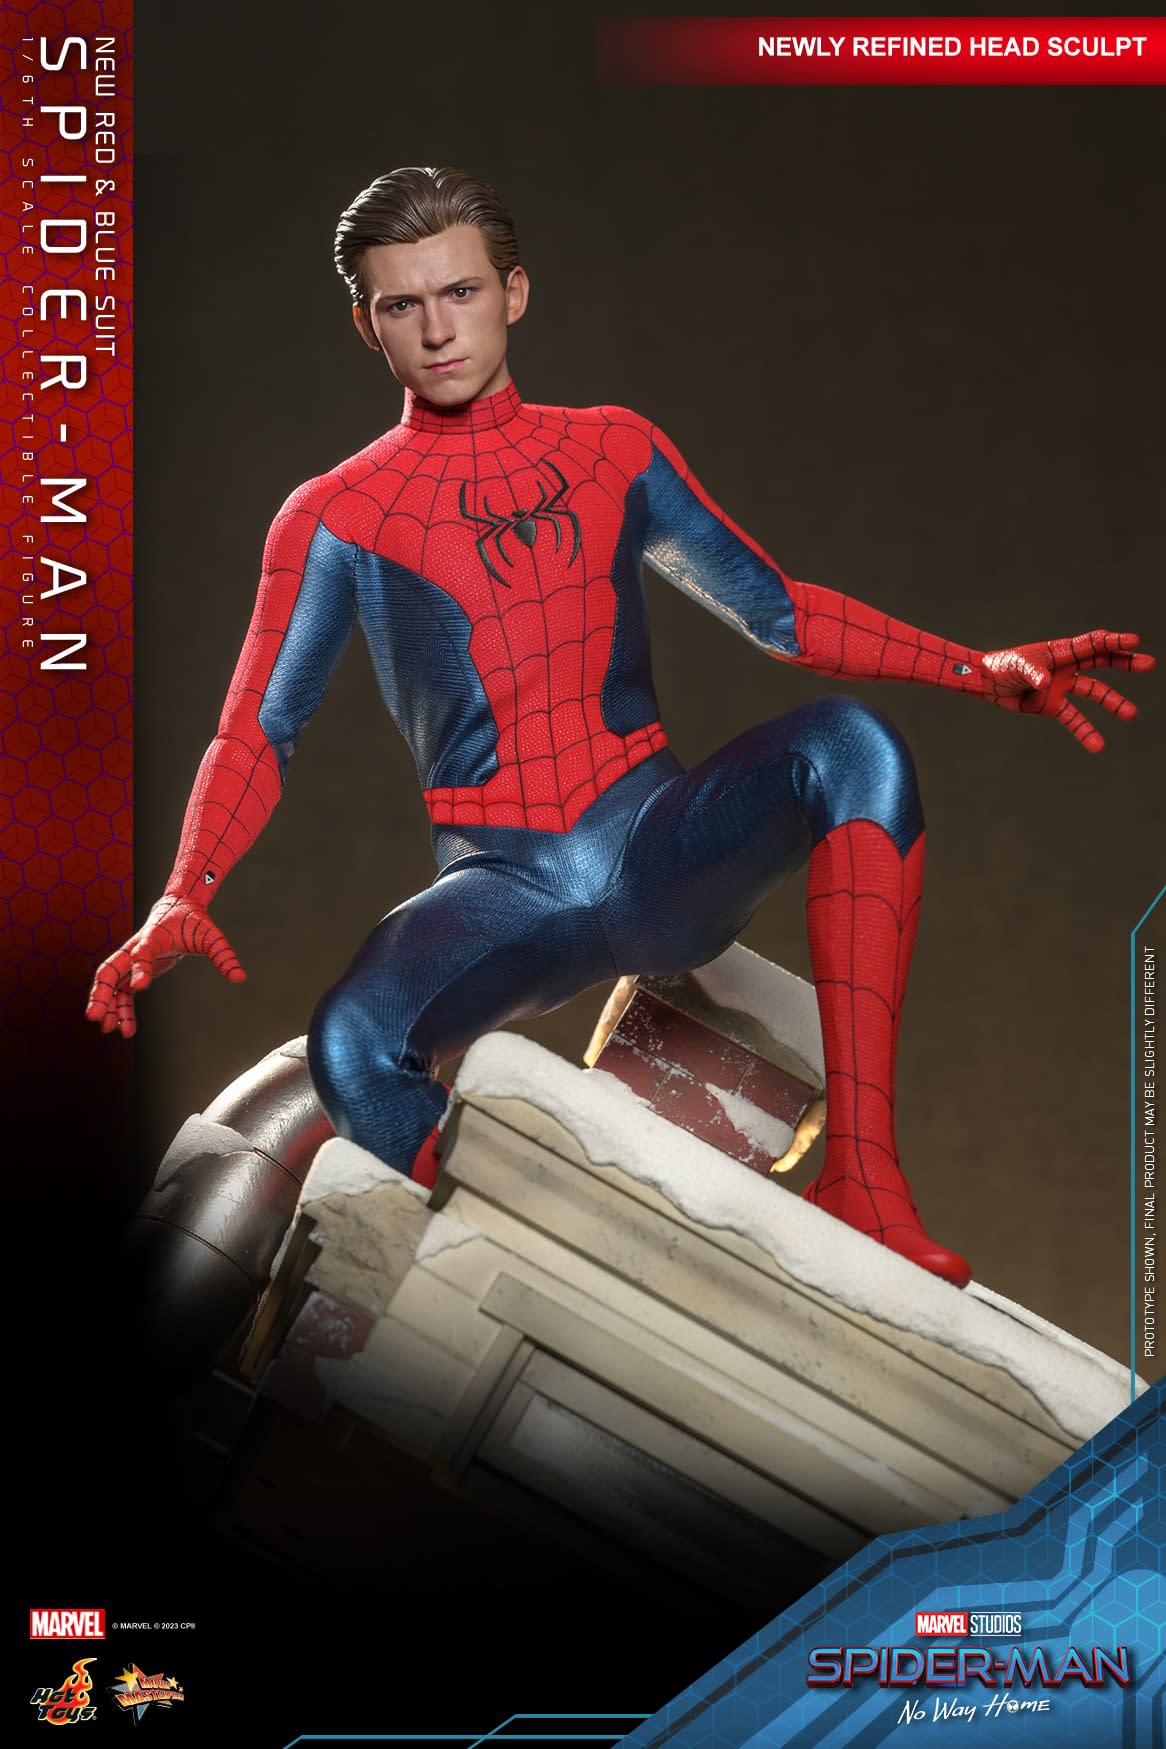 Hot Toys Gives Updates on Head Sculpts for Spider-Man, Thor and More